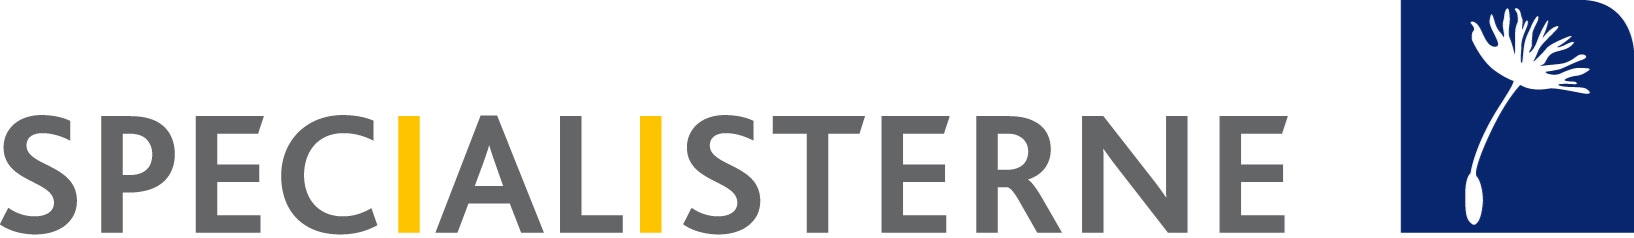 The logo for Specialisterne